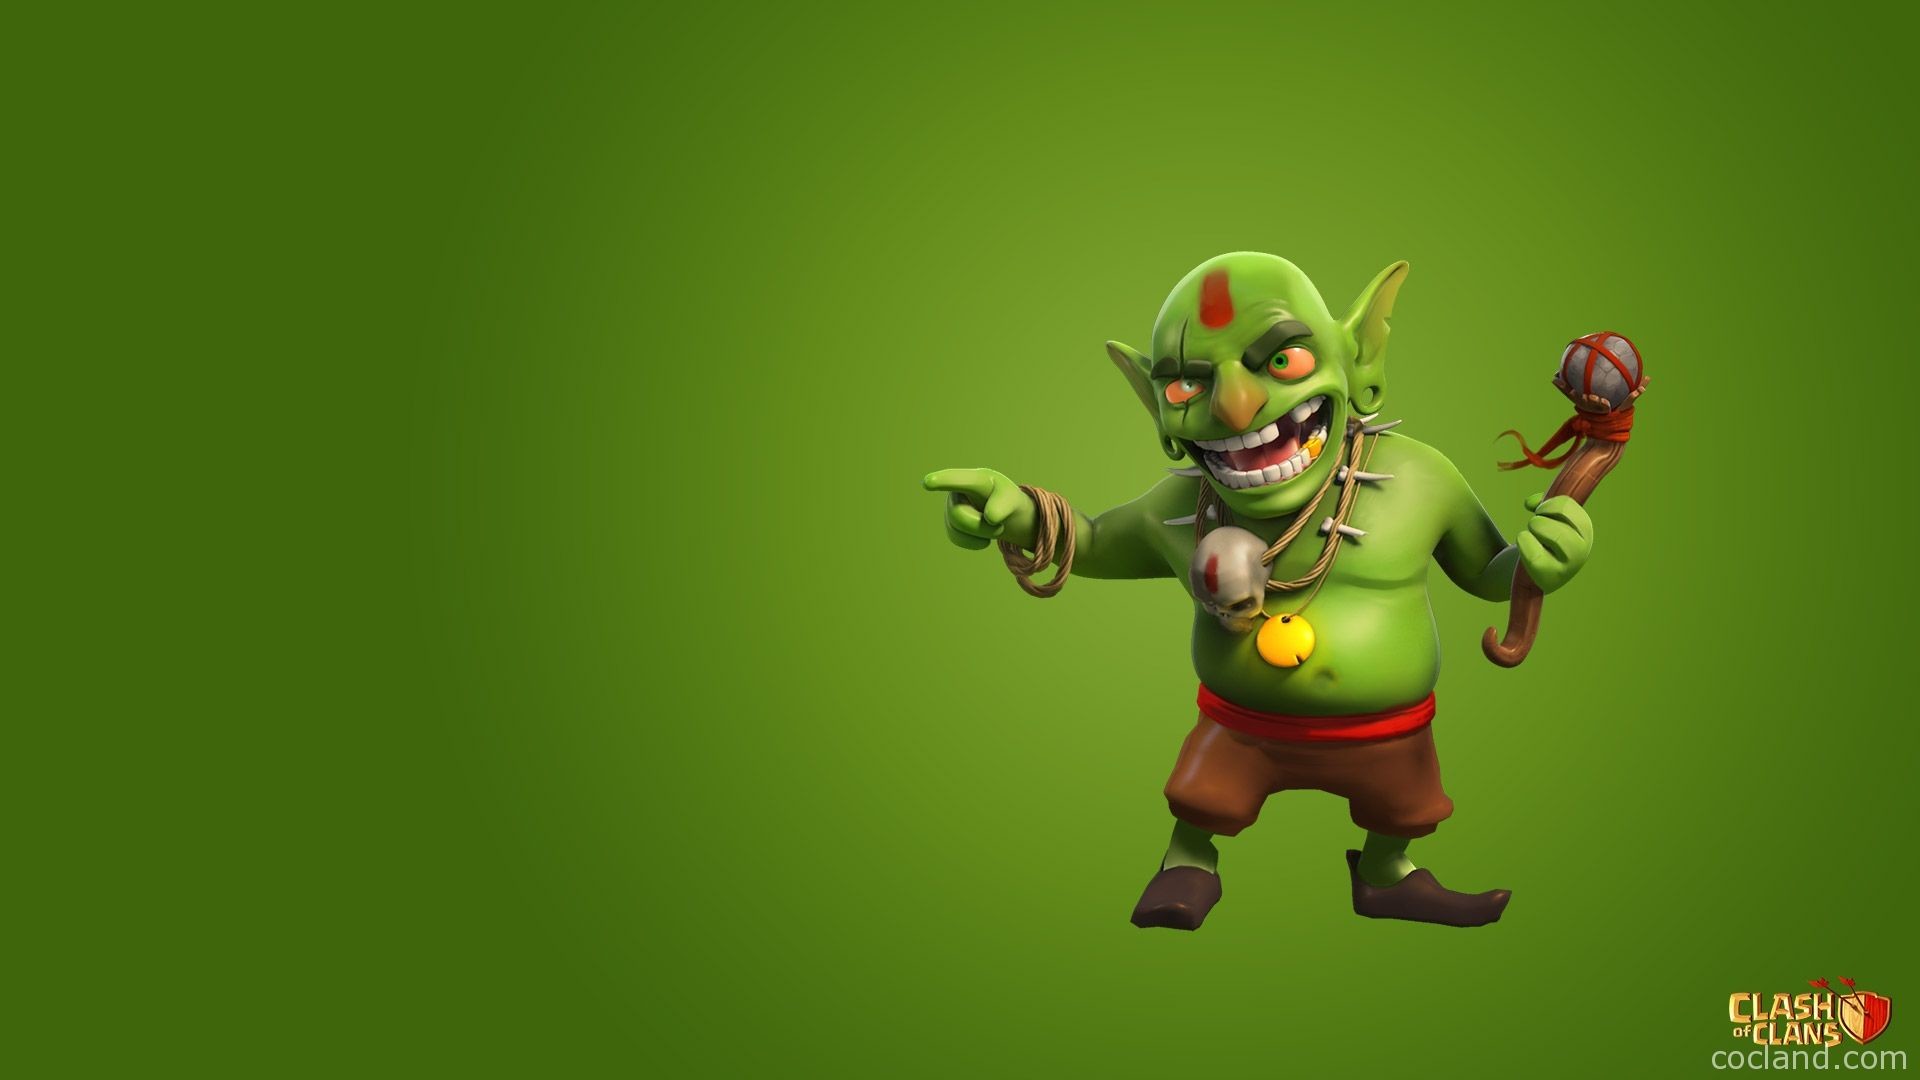 1920x1080 barbarian king ver ball jointed doll 3d model stl 2 Source Â· Clash Of Clans  Troops Wallpapers Wallpaper Cave